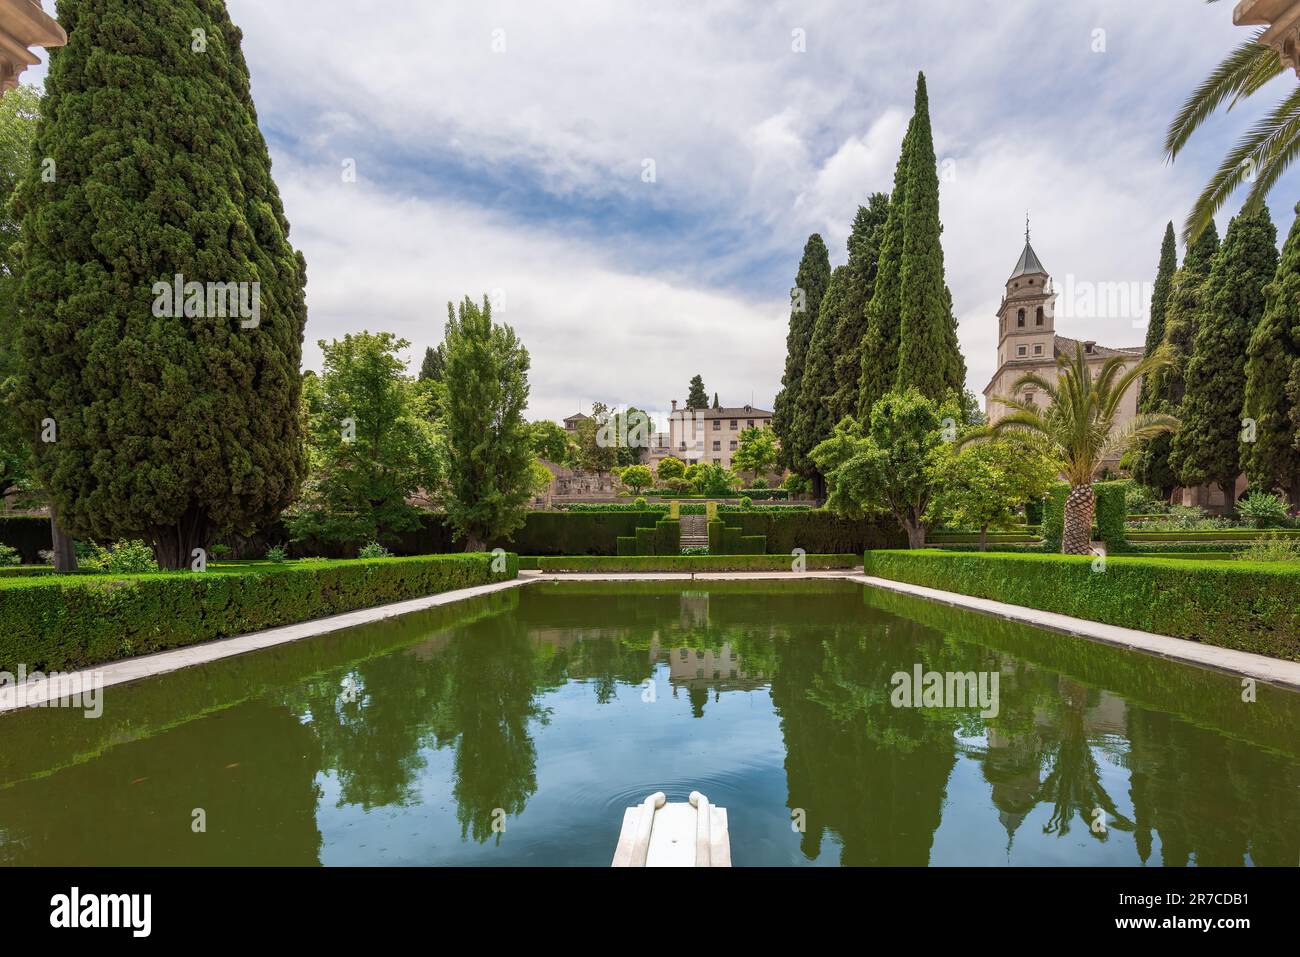 Pool of Partal Palace at El Partal area of Alhambra with Partal Gardens and Church of Santa Maria de la Alhambra - Granada, Andalusia, Spain Stock Photo